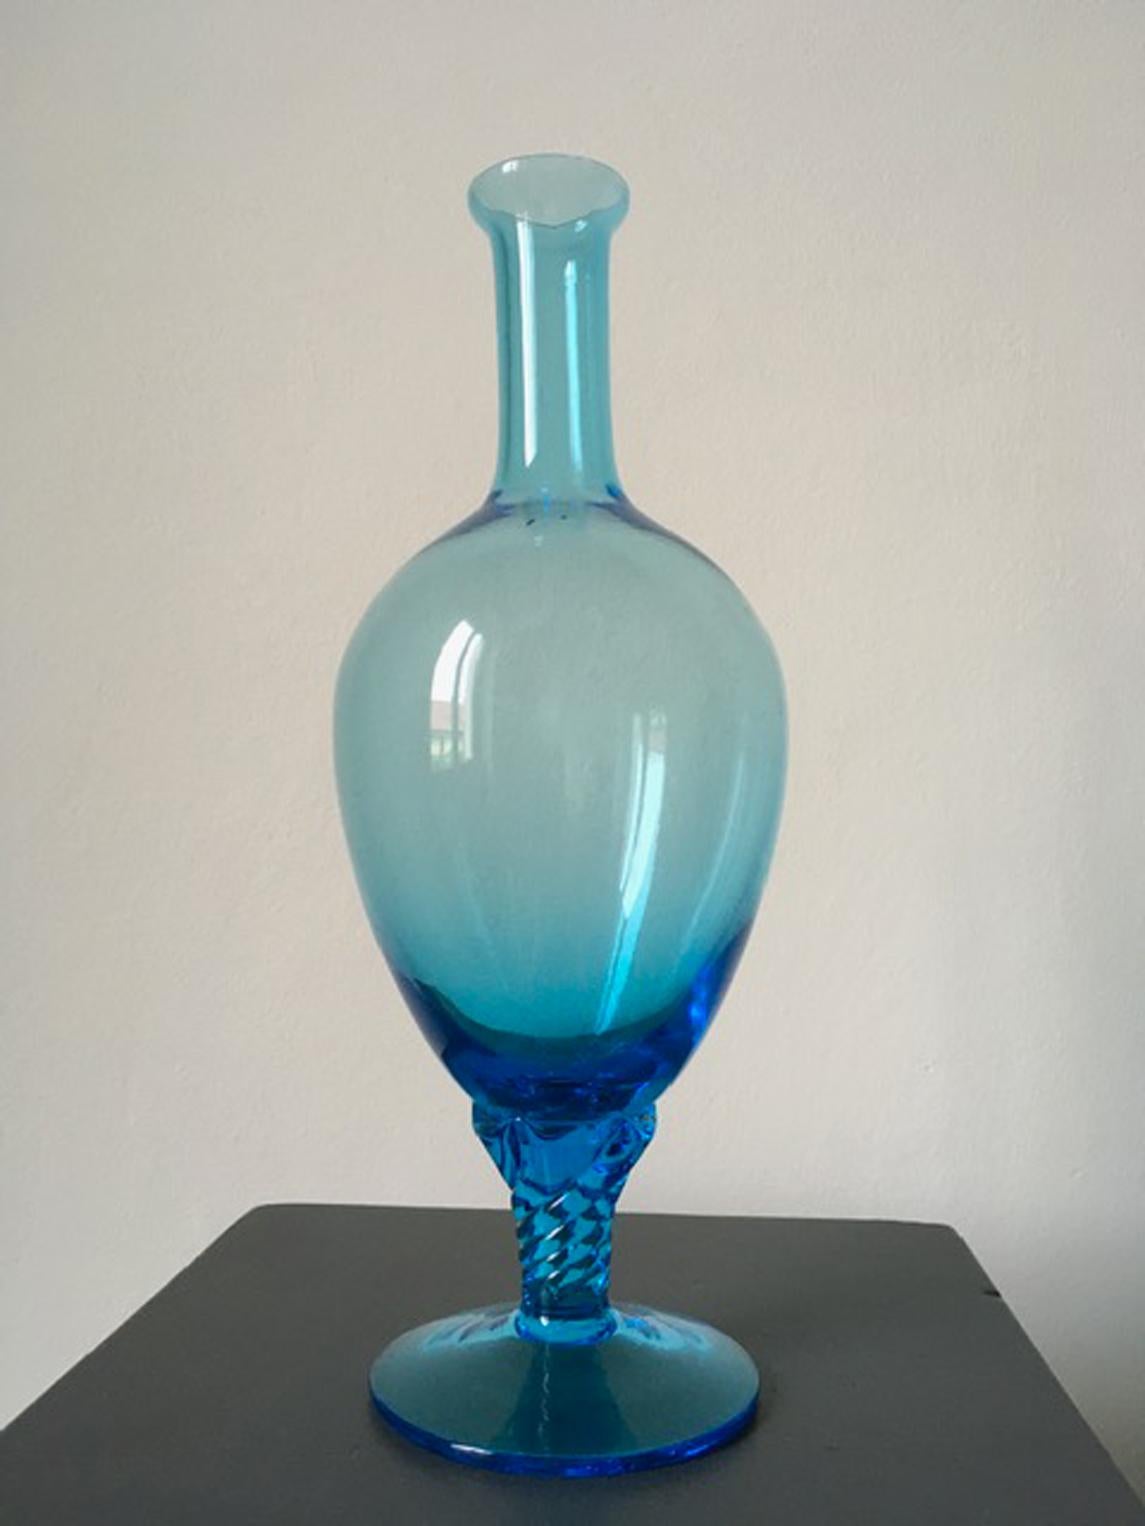 This is a very charming piece hand made in blown glass from the well known Murano isle, in Venice, Italy.
It has a transparent turquoise color and it has an elegant shape.
It is in perfect conditions.

We're antique dealer and the piece will be